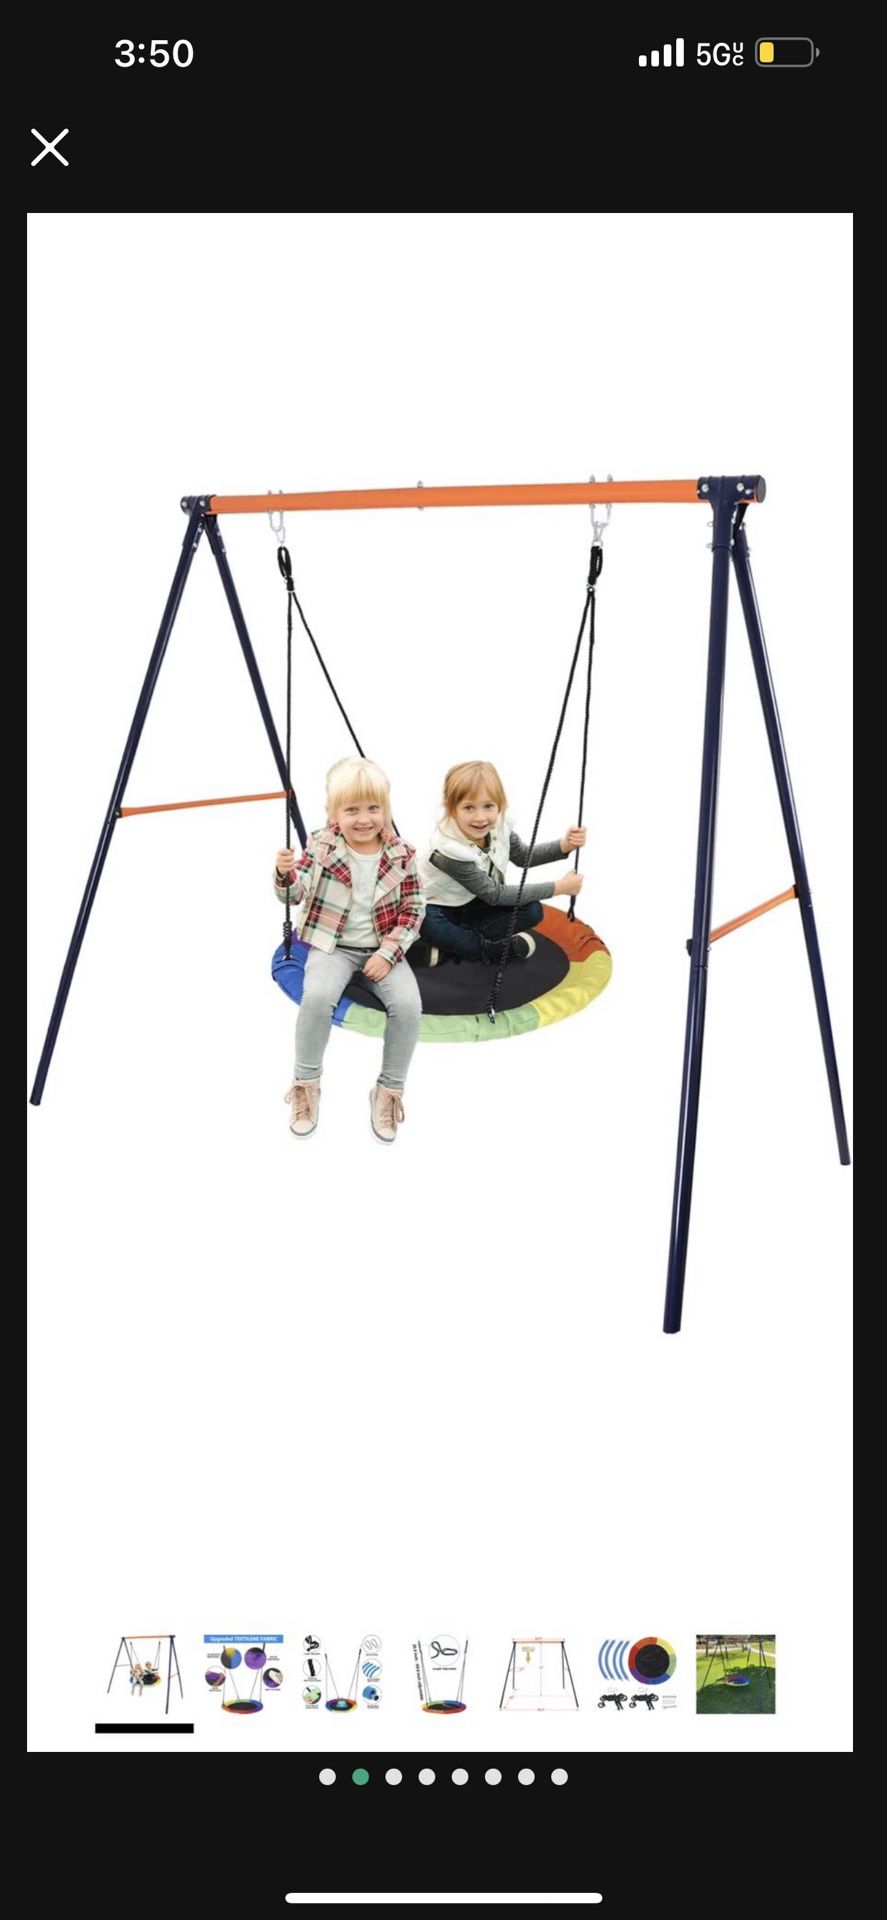 Swing Set with Saucer Swings for Backyard - 40'' Spider Web Swing Oxford Web Swing Mat and Heavy Duty A Frame Metal Swing Stand for Playground